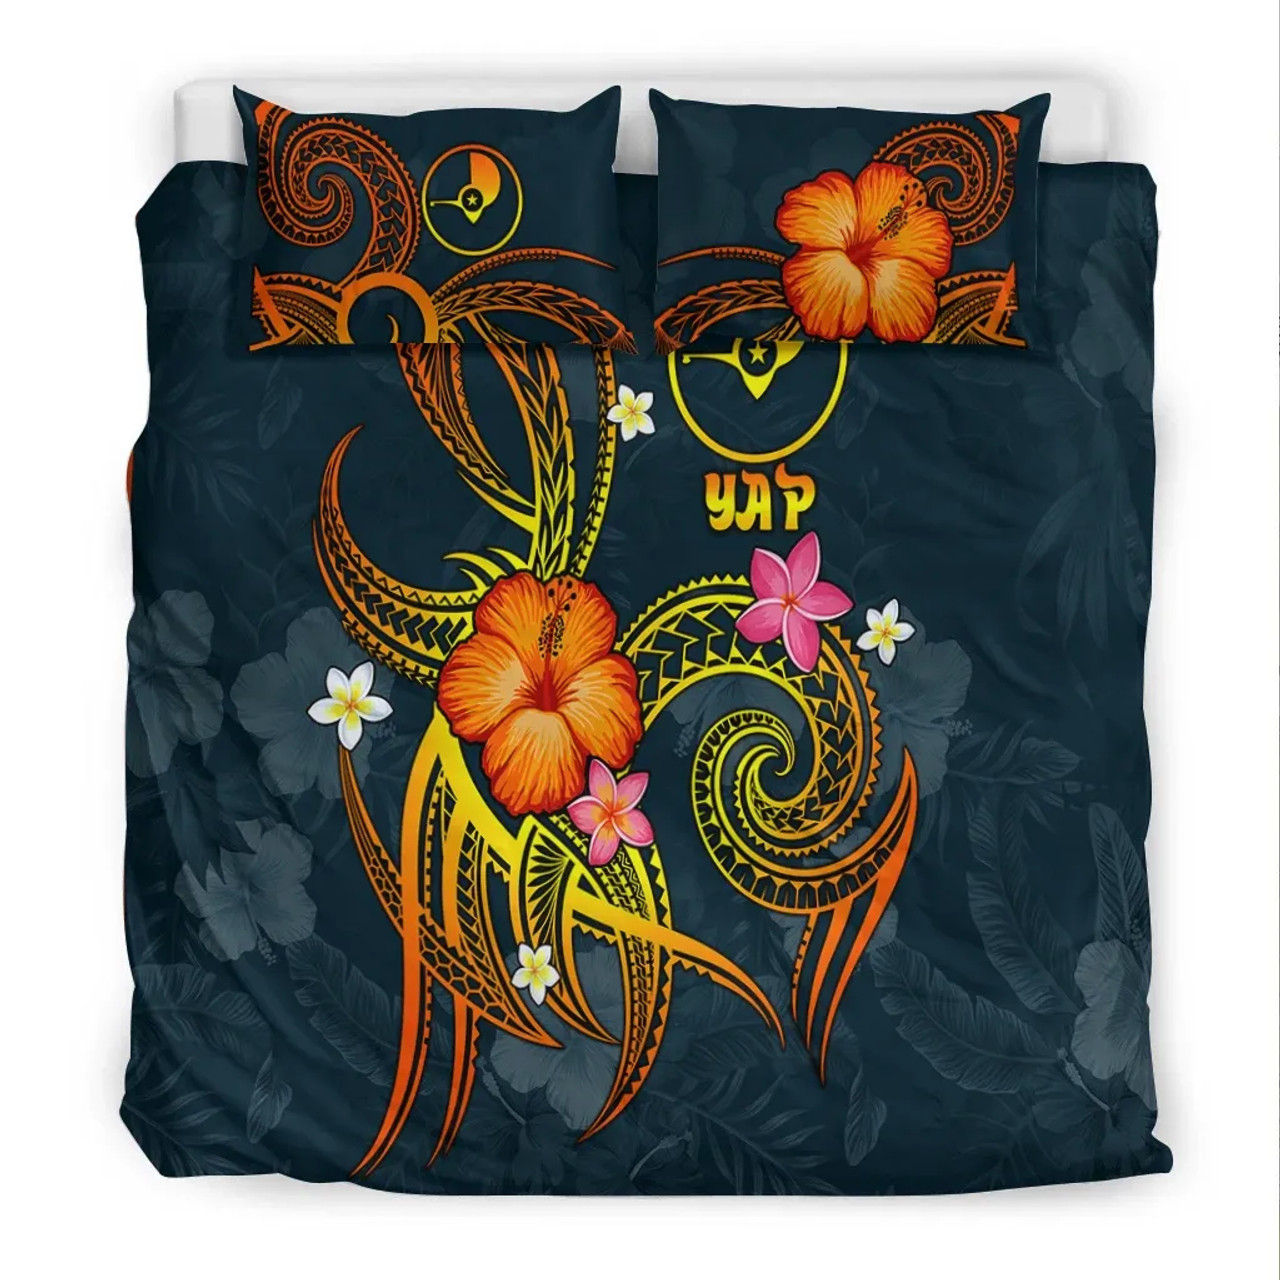 Federated States Of Micronesia Polynesian Bedding Set - Turtle With Blooming Hibiscus Red 4